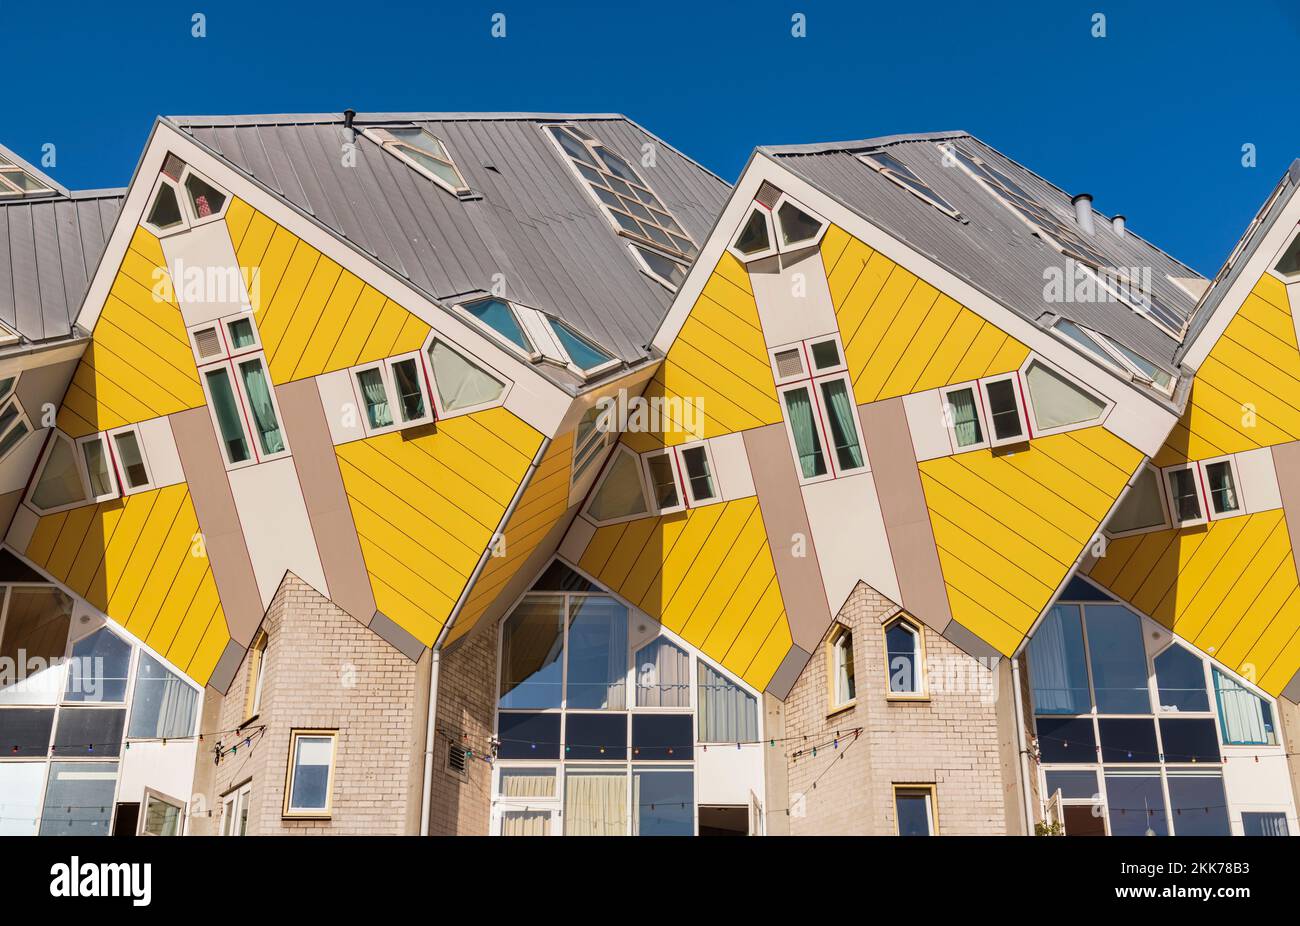 Holland, Rotterdam, The Cube Houses, an innovative housing development where each house is a cube tilted over by 45 degrees, designed by Dutch architect Piet Blom and bult between 1977 and 1984. Stock Photo